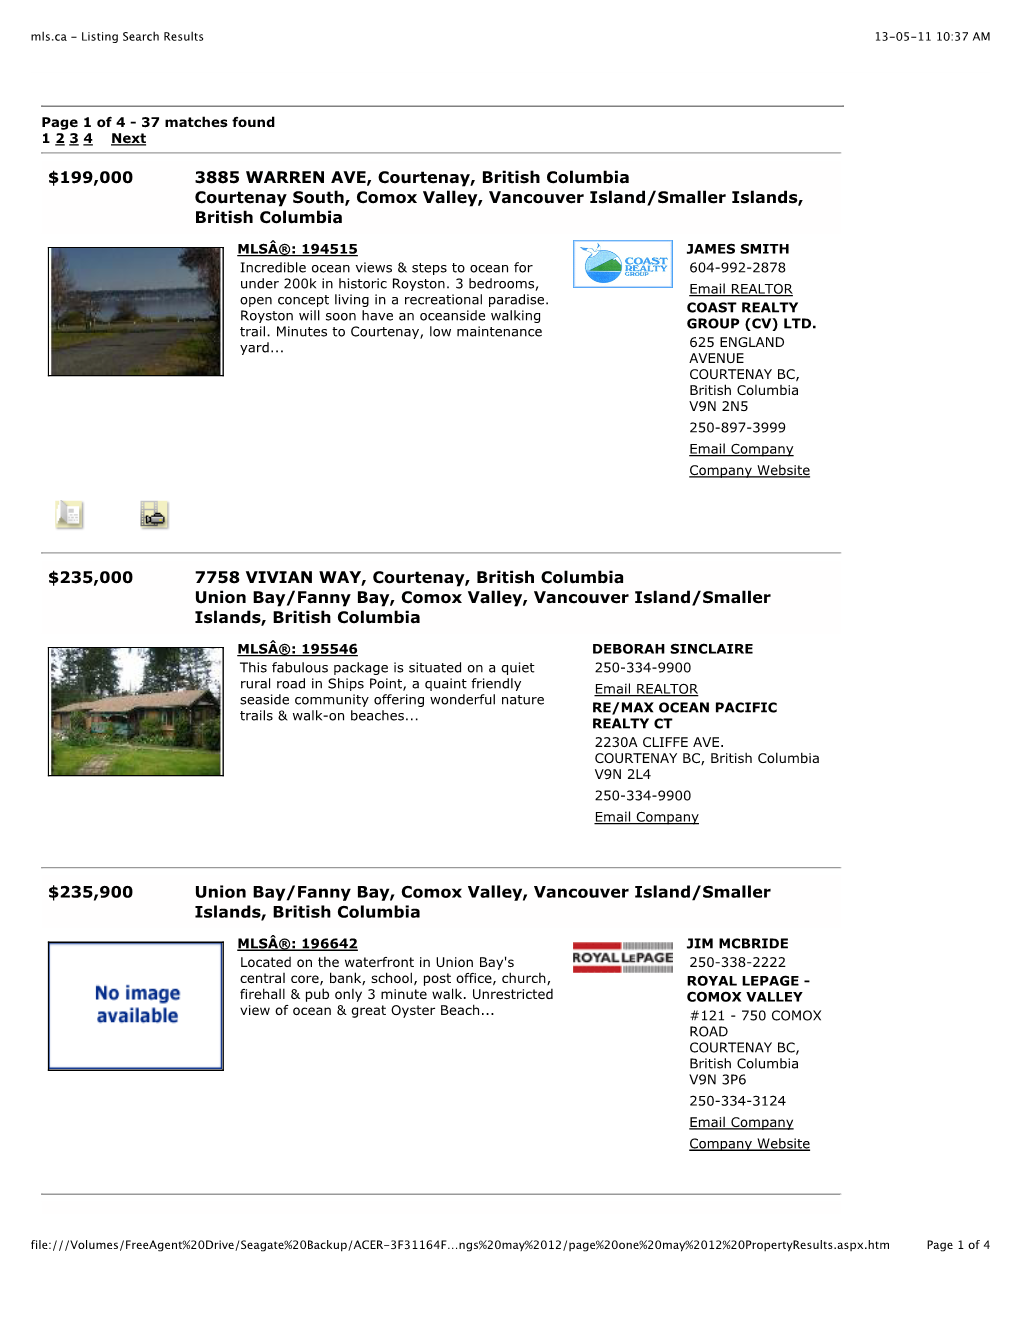 Mls.Ca - Listing Search Results 13-05-11 10:37 AM